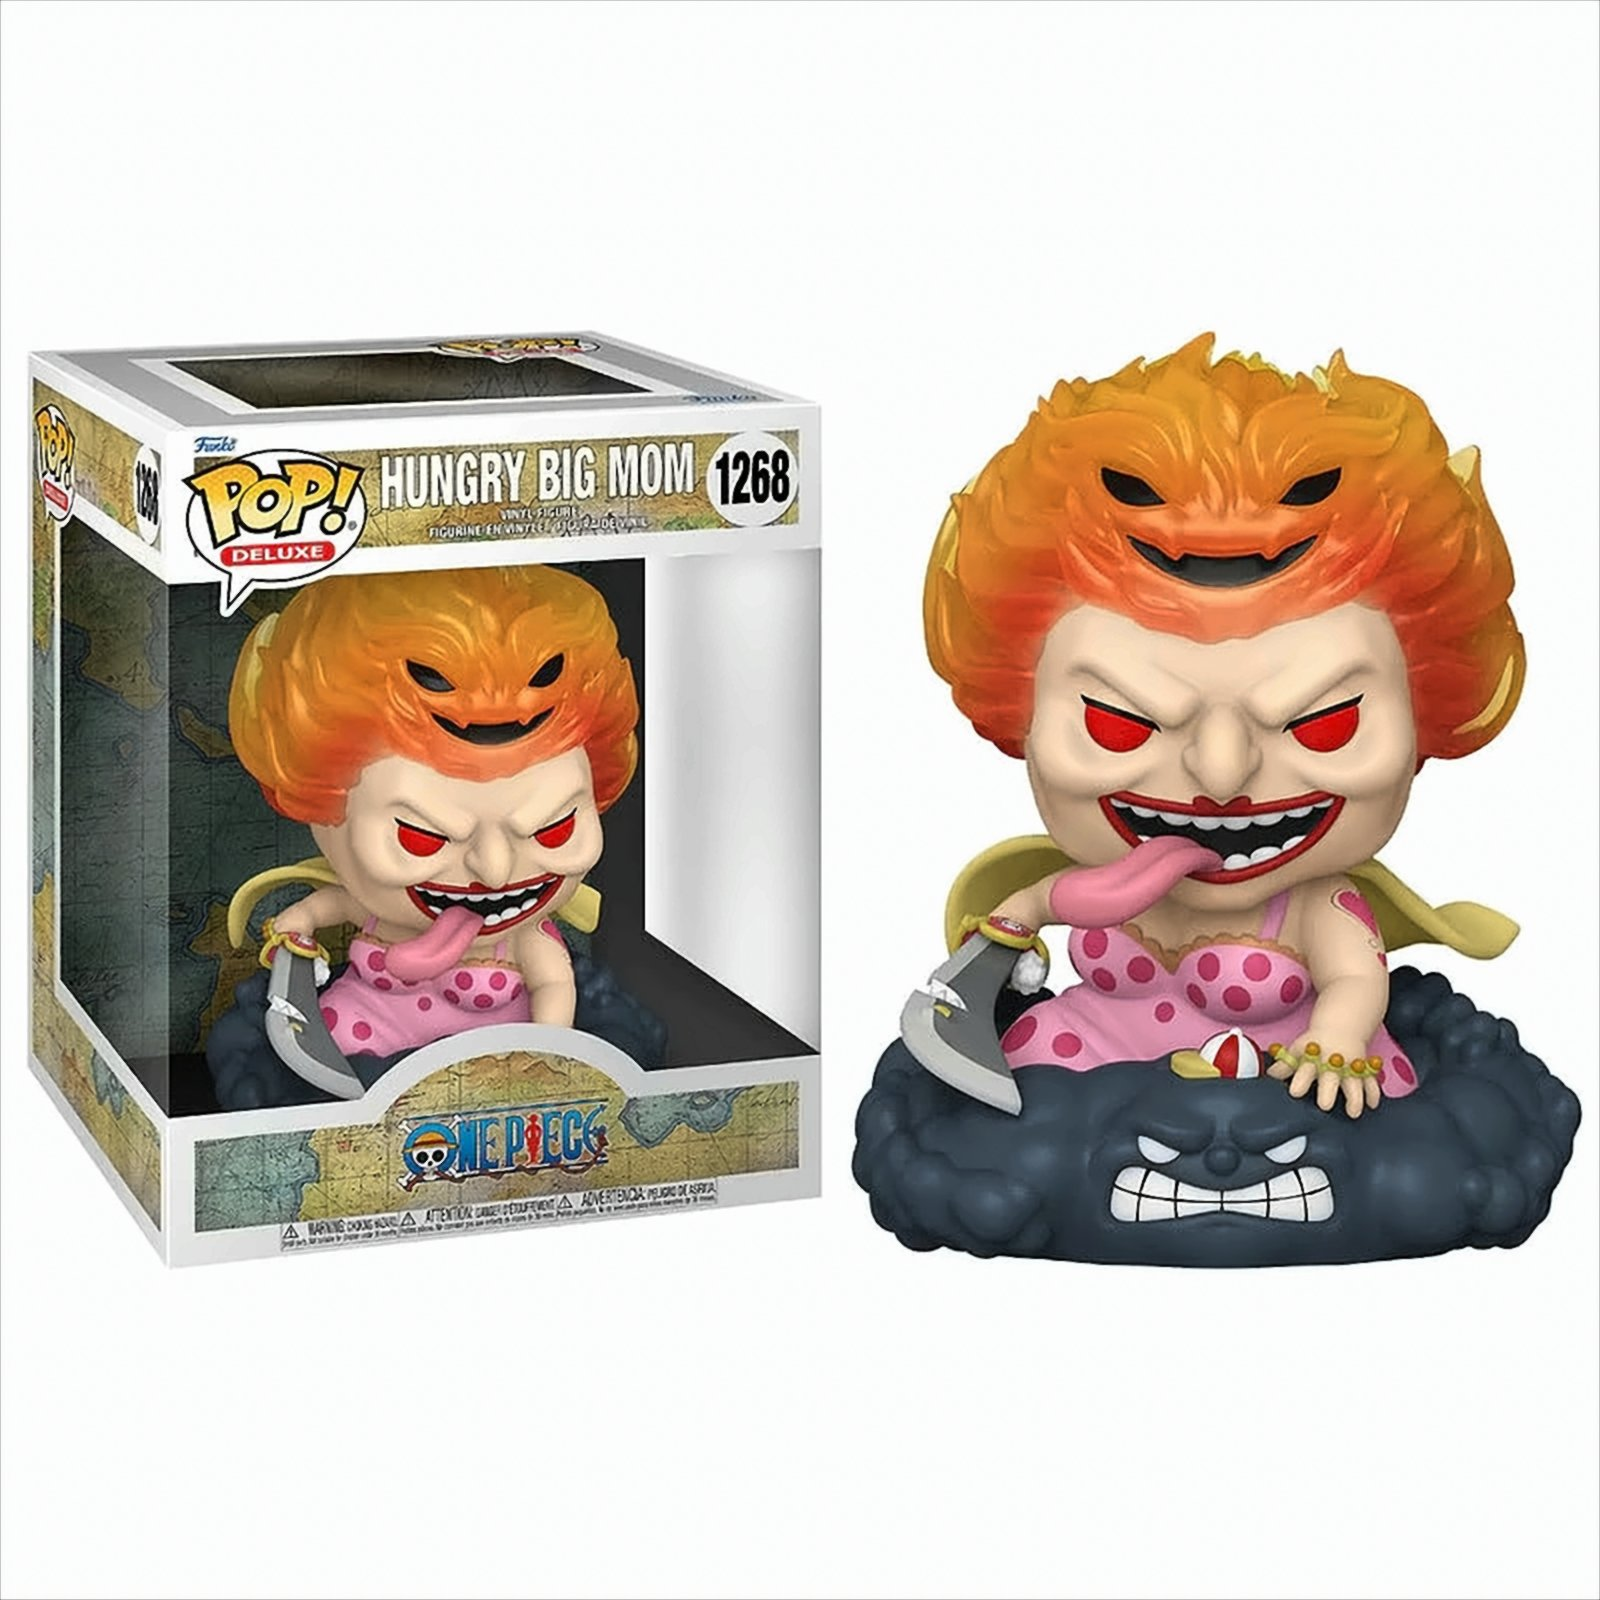 POP Deluxe - Big 18 One Hungry cm Mom Piece 